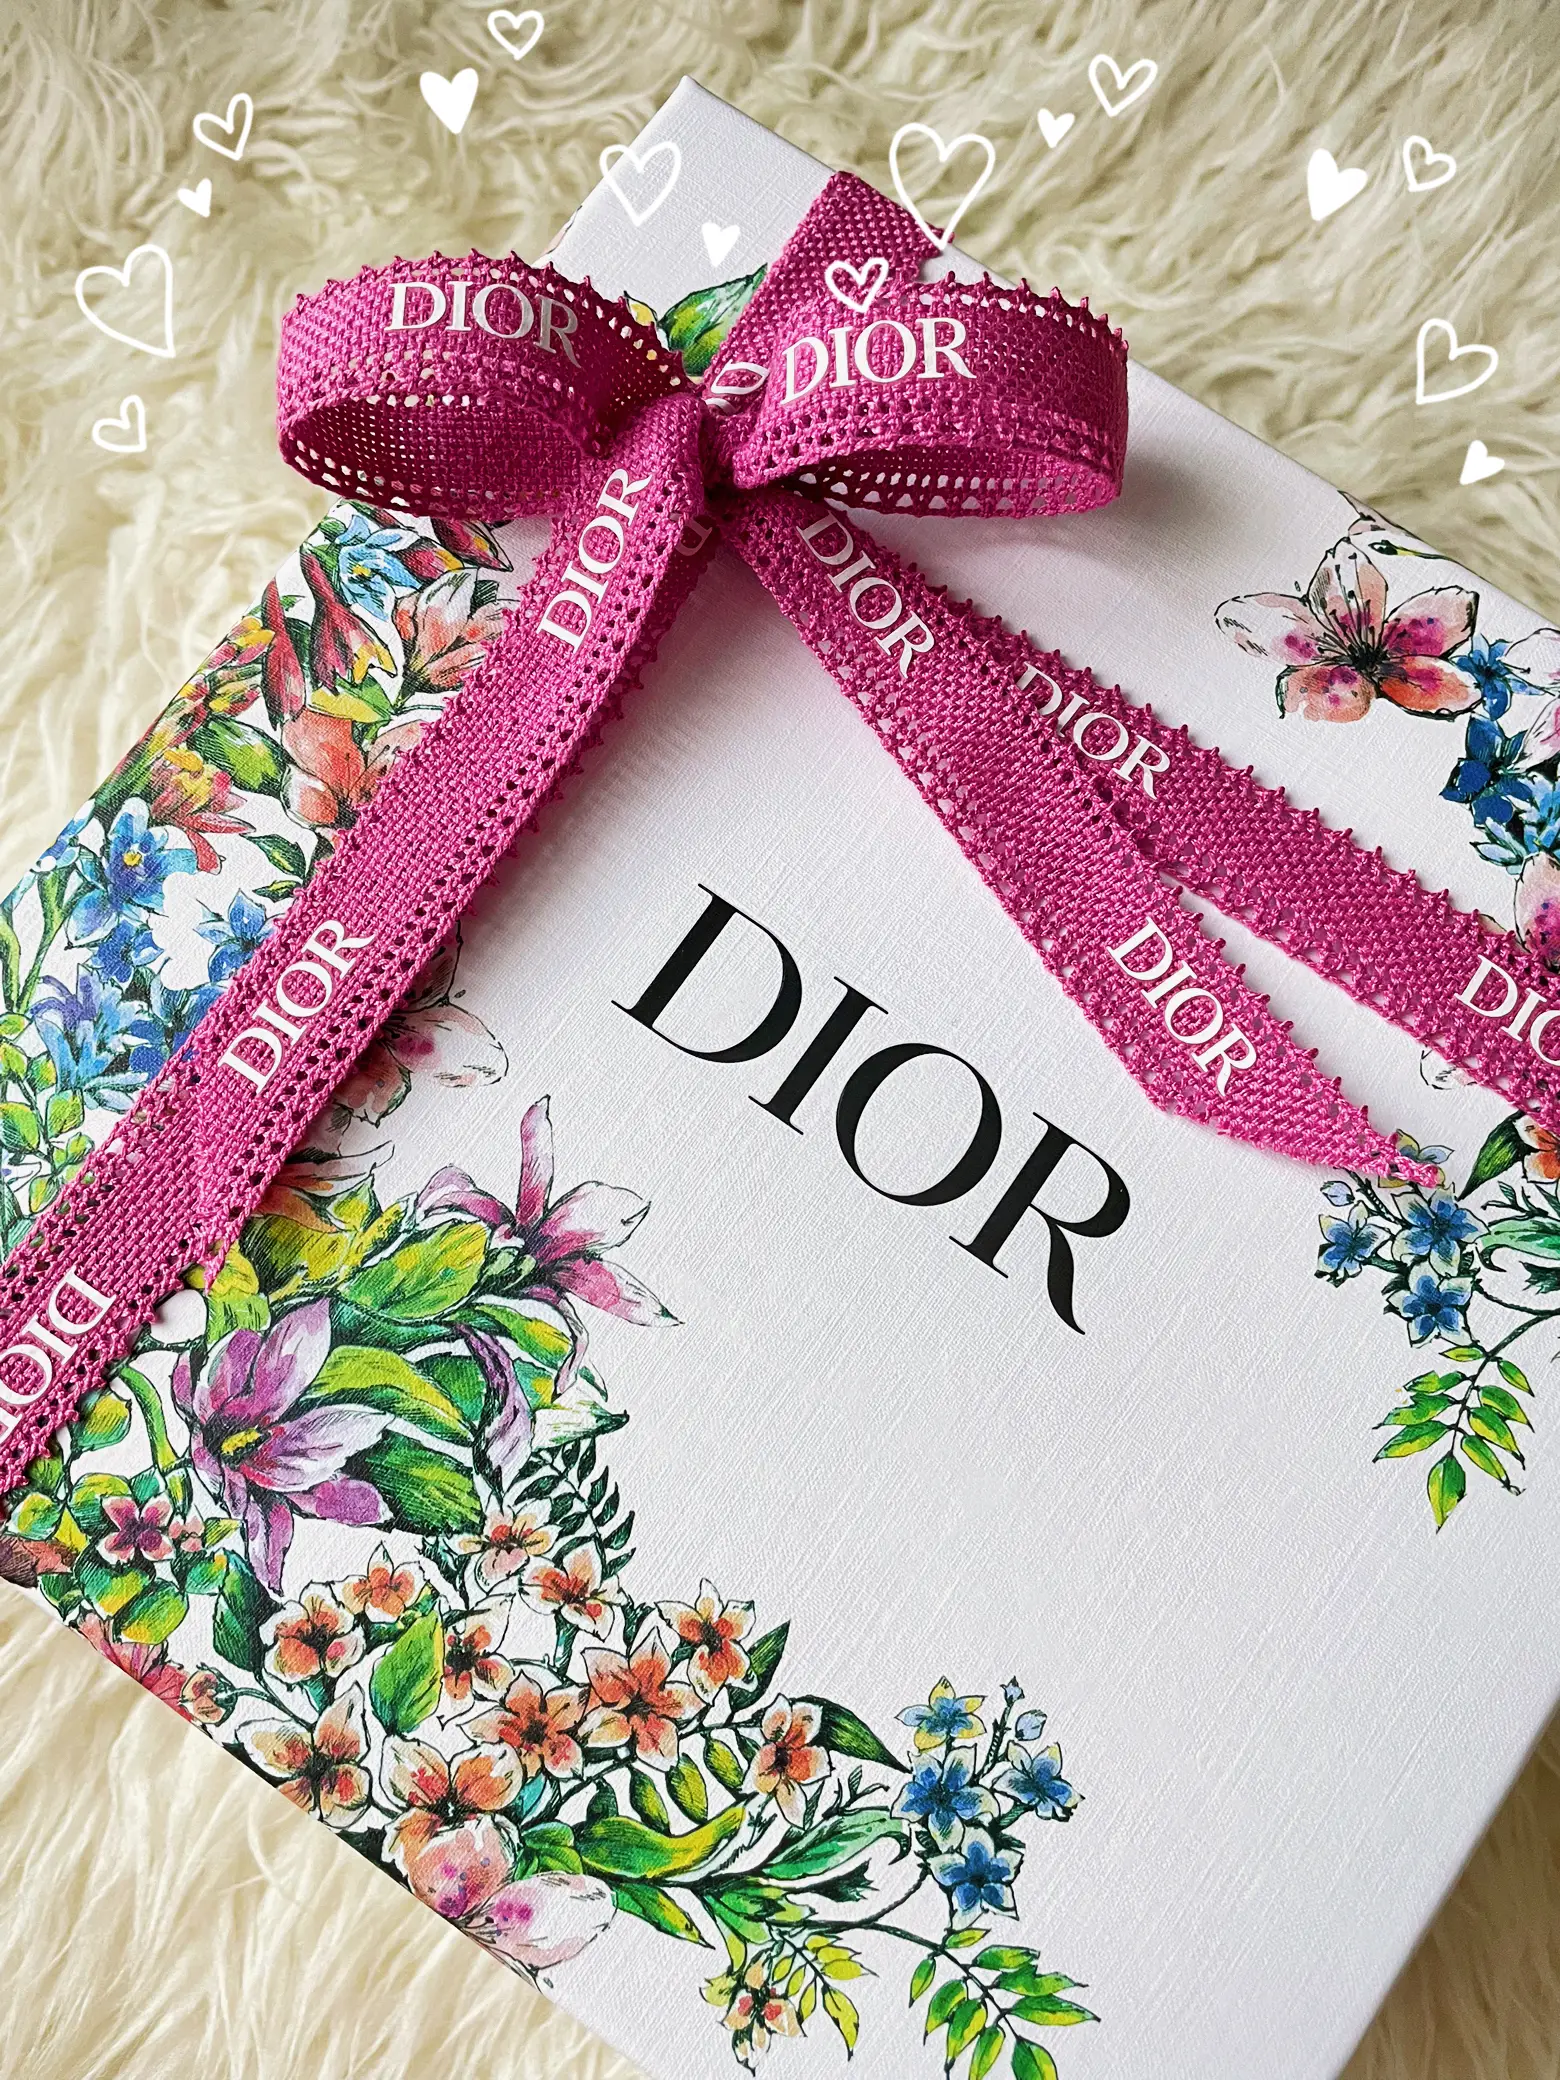 ⭐Dior skincare set worth rebuying ⭐, Gallery posted by BORA